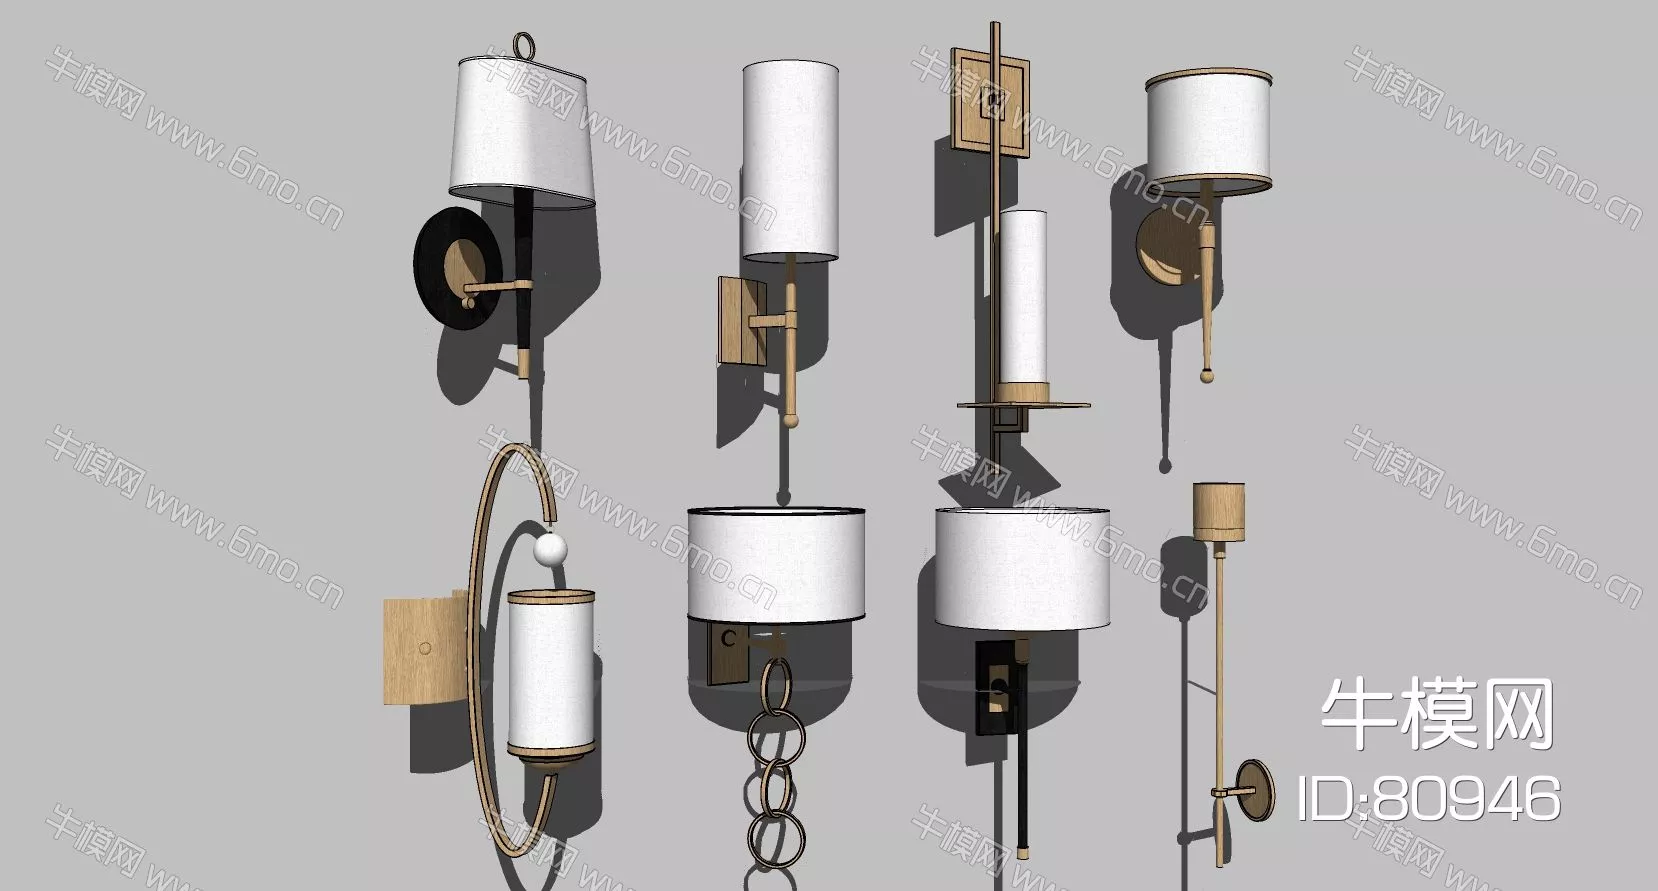 CHINESE WALL LAMP - SKETCHUP 3D MODEL - ENSCAPE - 80946